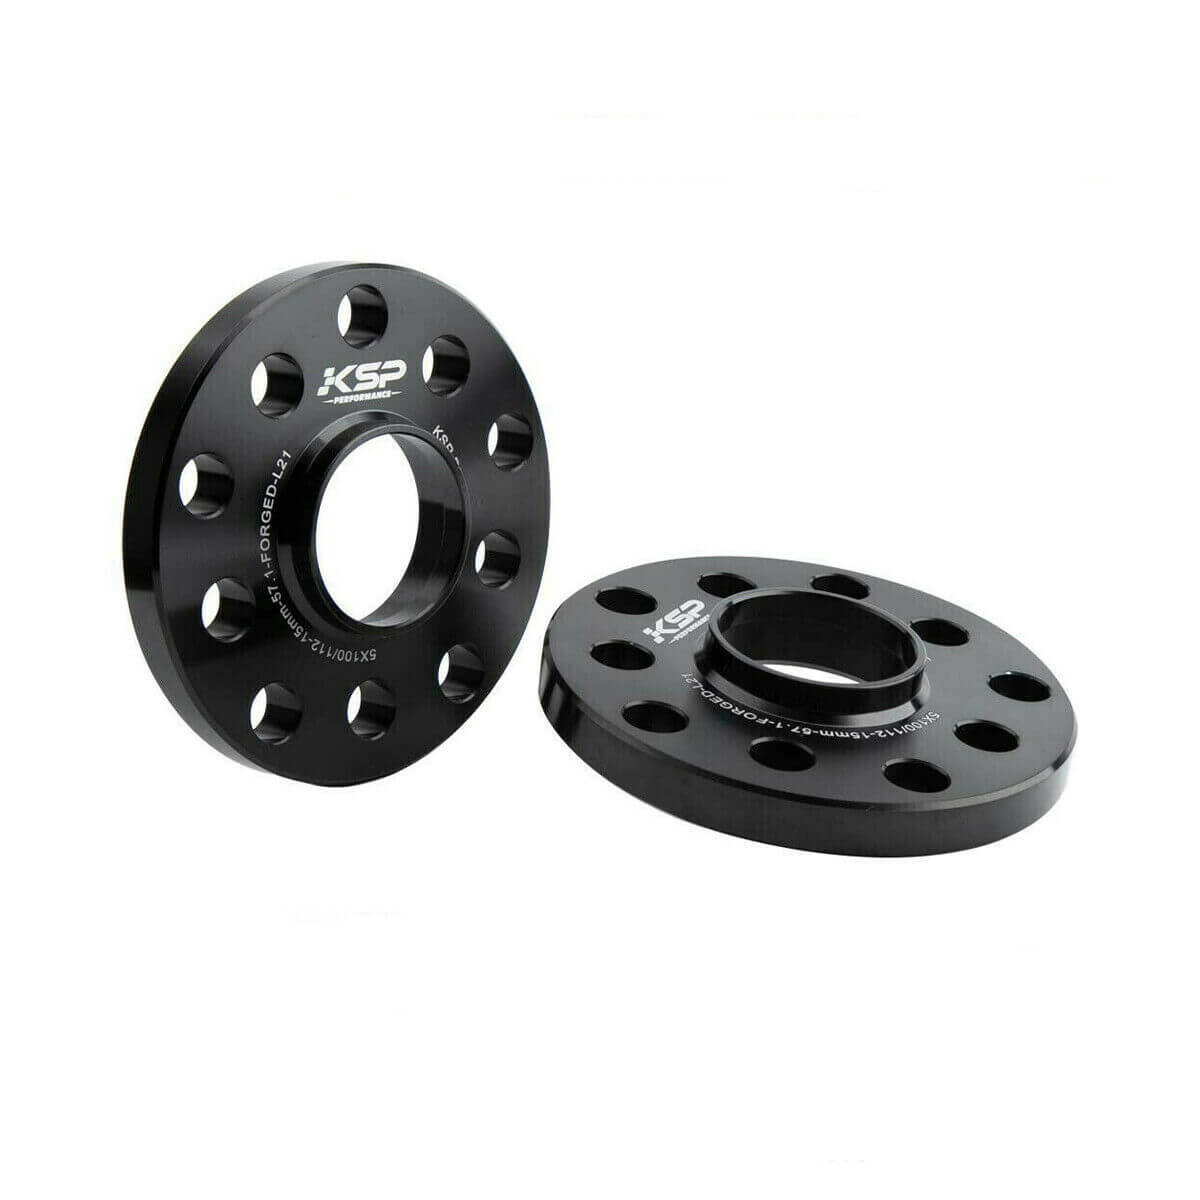 15&20mm Wheel spacers - Audi A3/A4/A6/S6/S8/VW - KSP Performance 